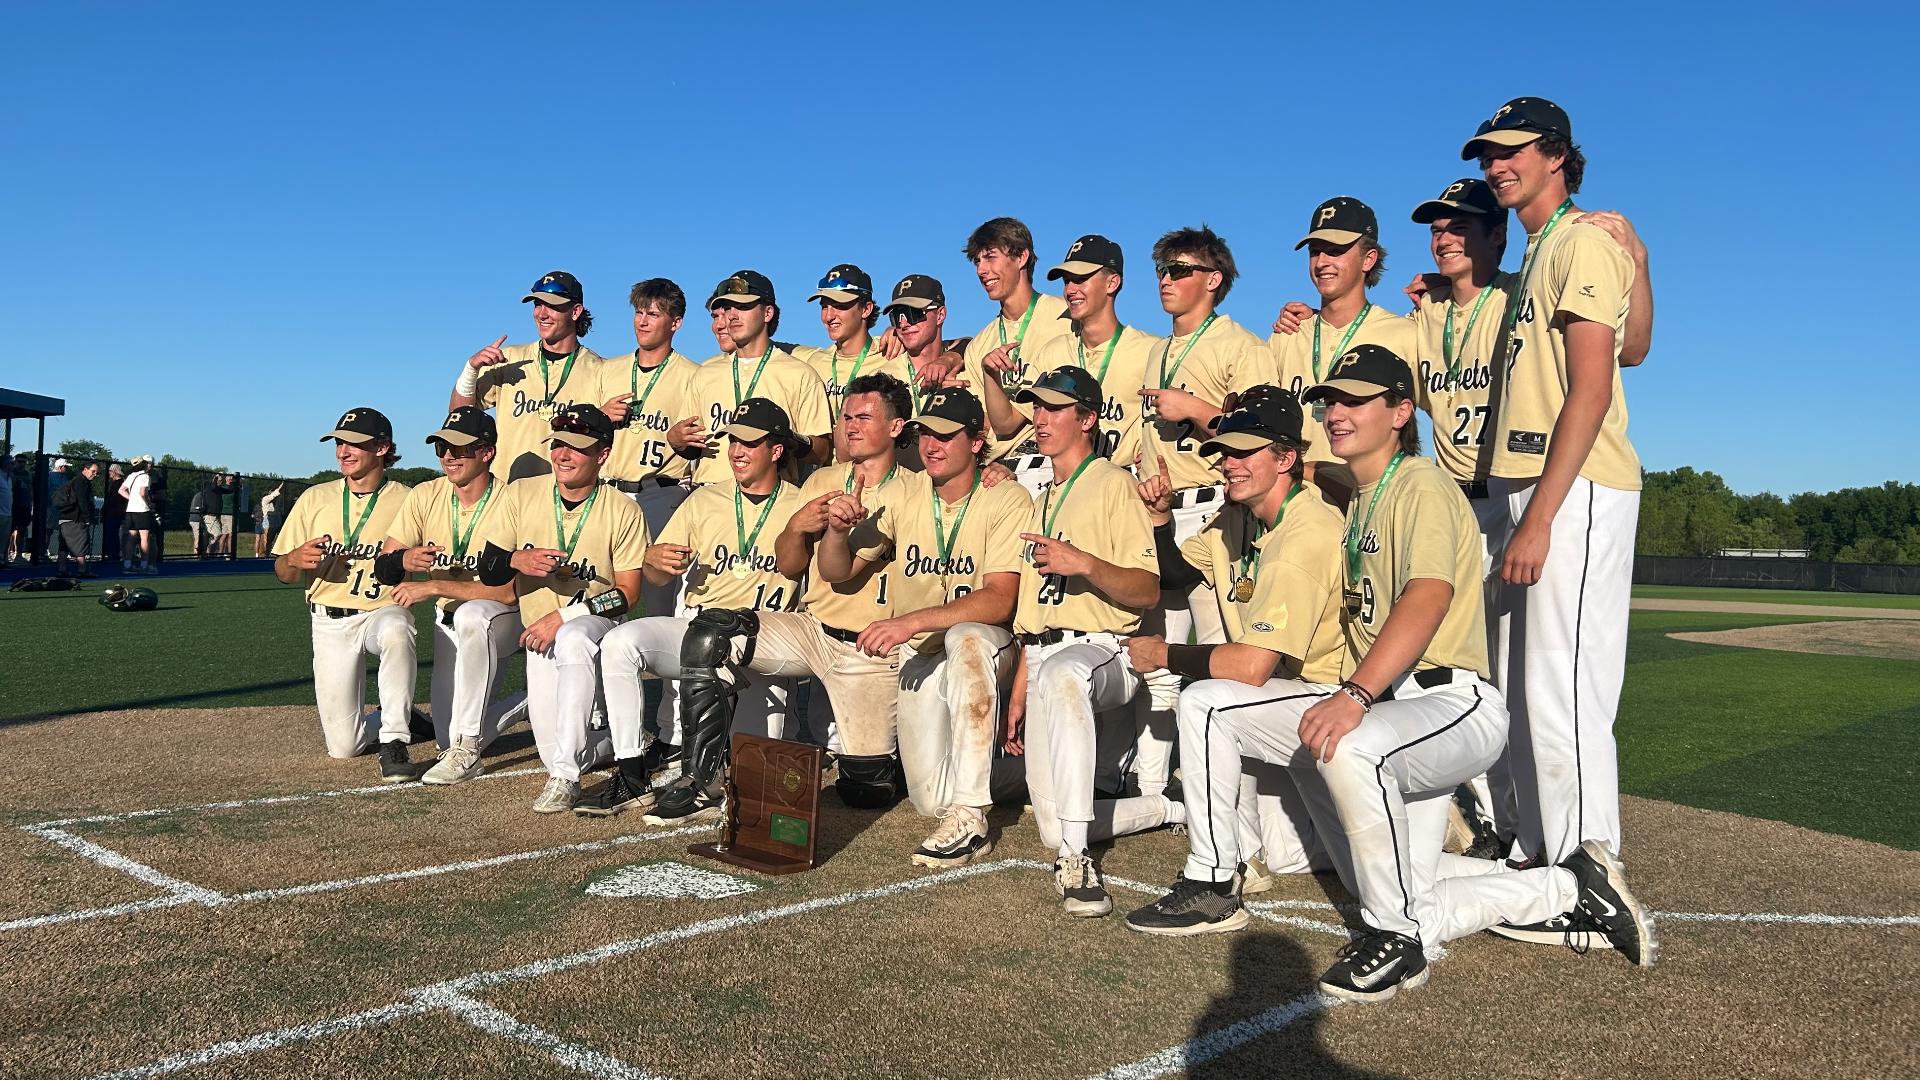 The Yellow Jackets finished fourth out of five teams in their division this season, but are playing their best baseball on the way to Akron.